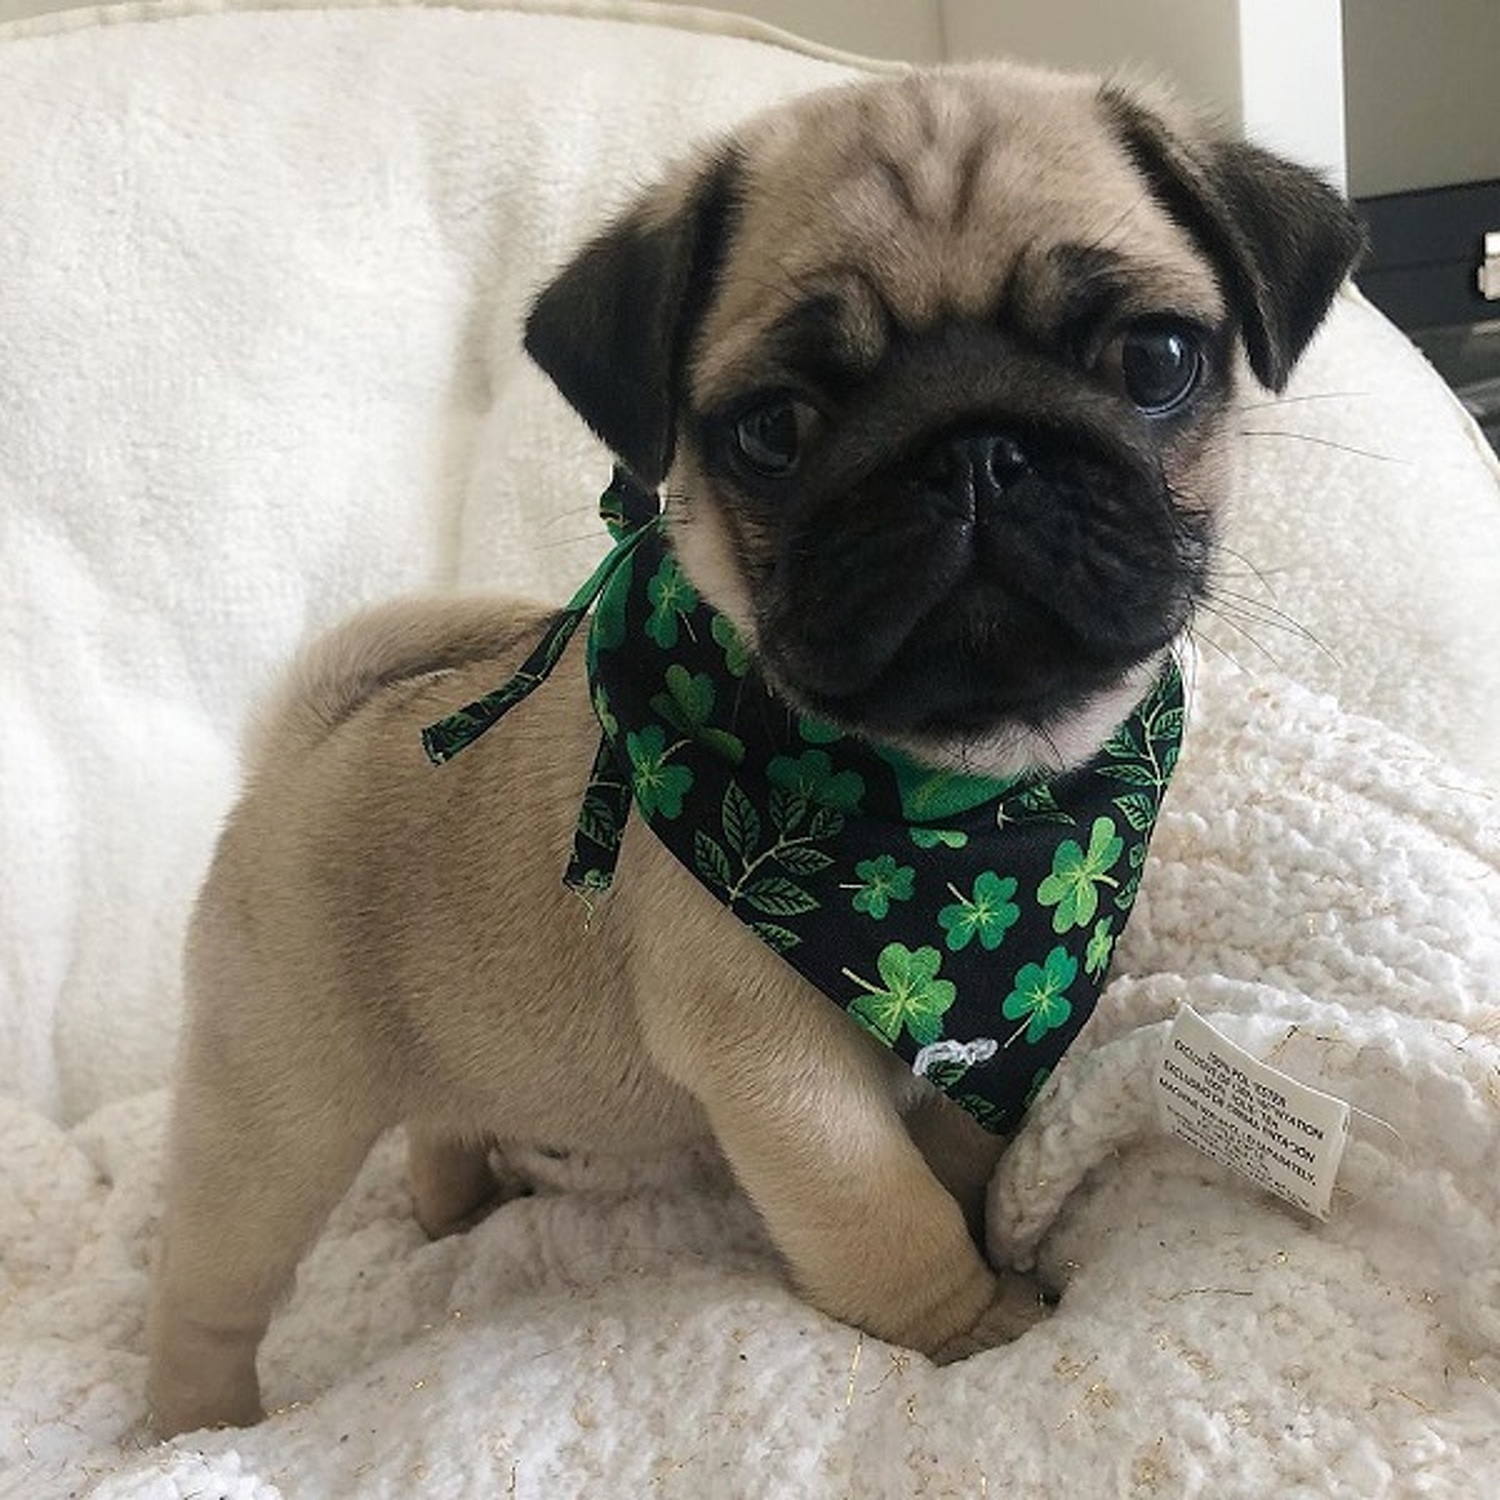 Pug, Beautiful Pug puppy for sale near me, Pug puppies for sale near me